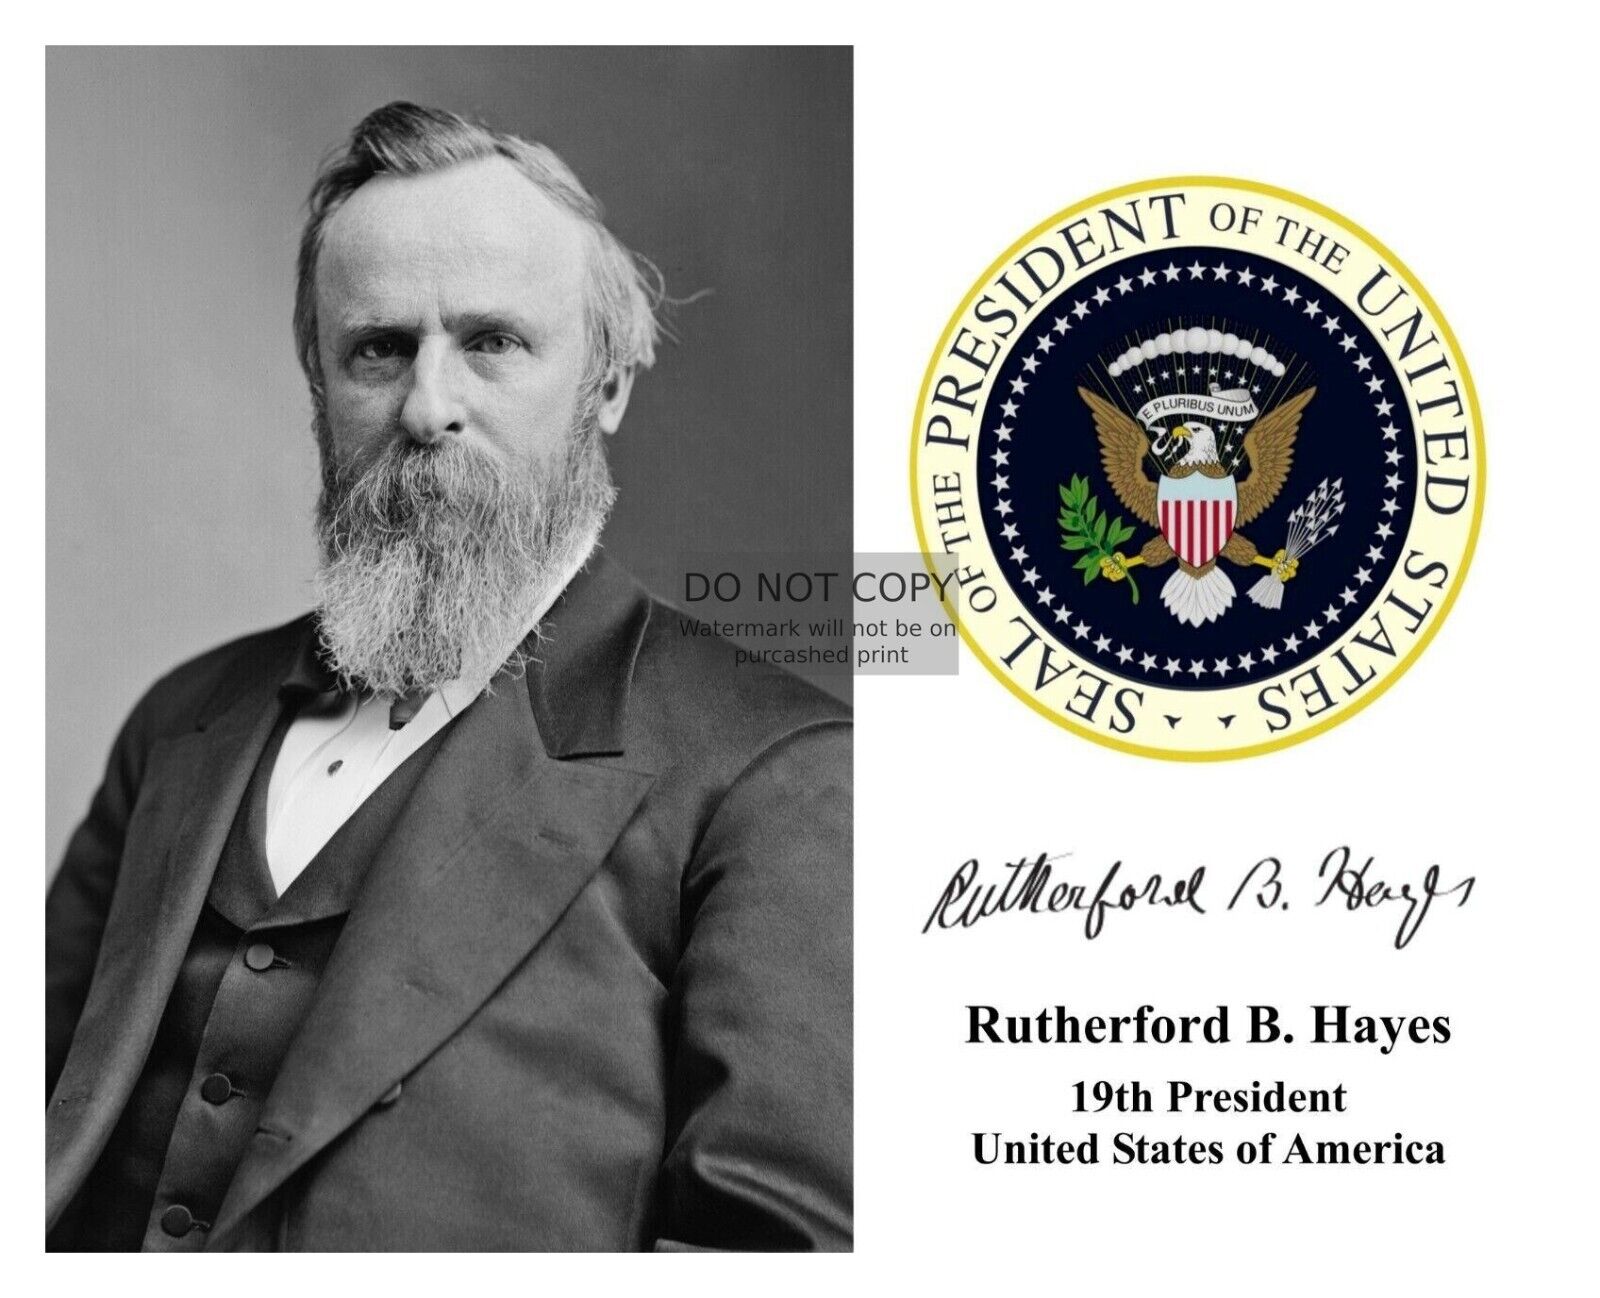 PRESIDENT RUTHERFORD B. HAYES PRESIDENTIAL SEAL AUTOGRAPHED 8X10 PHOTOGRAPH